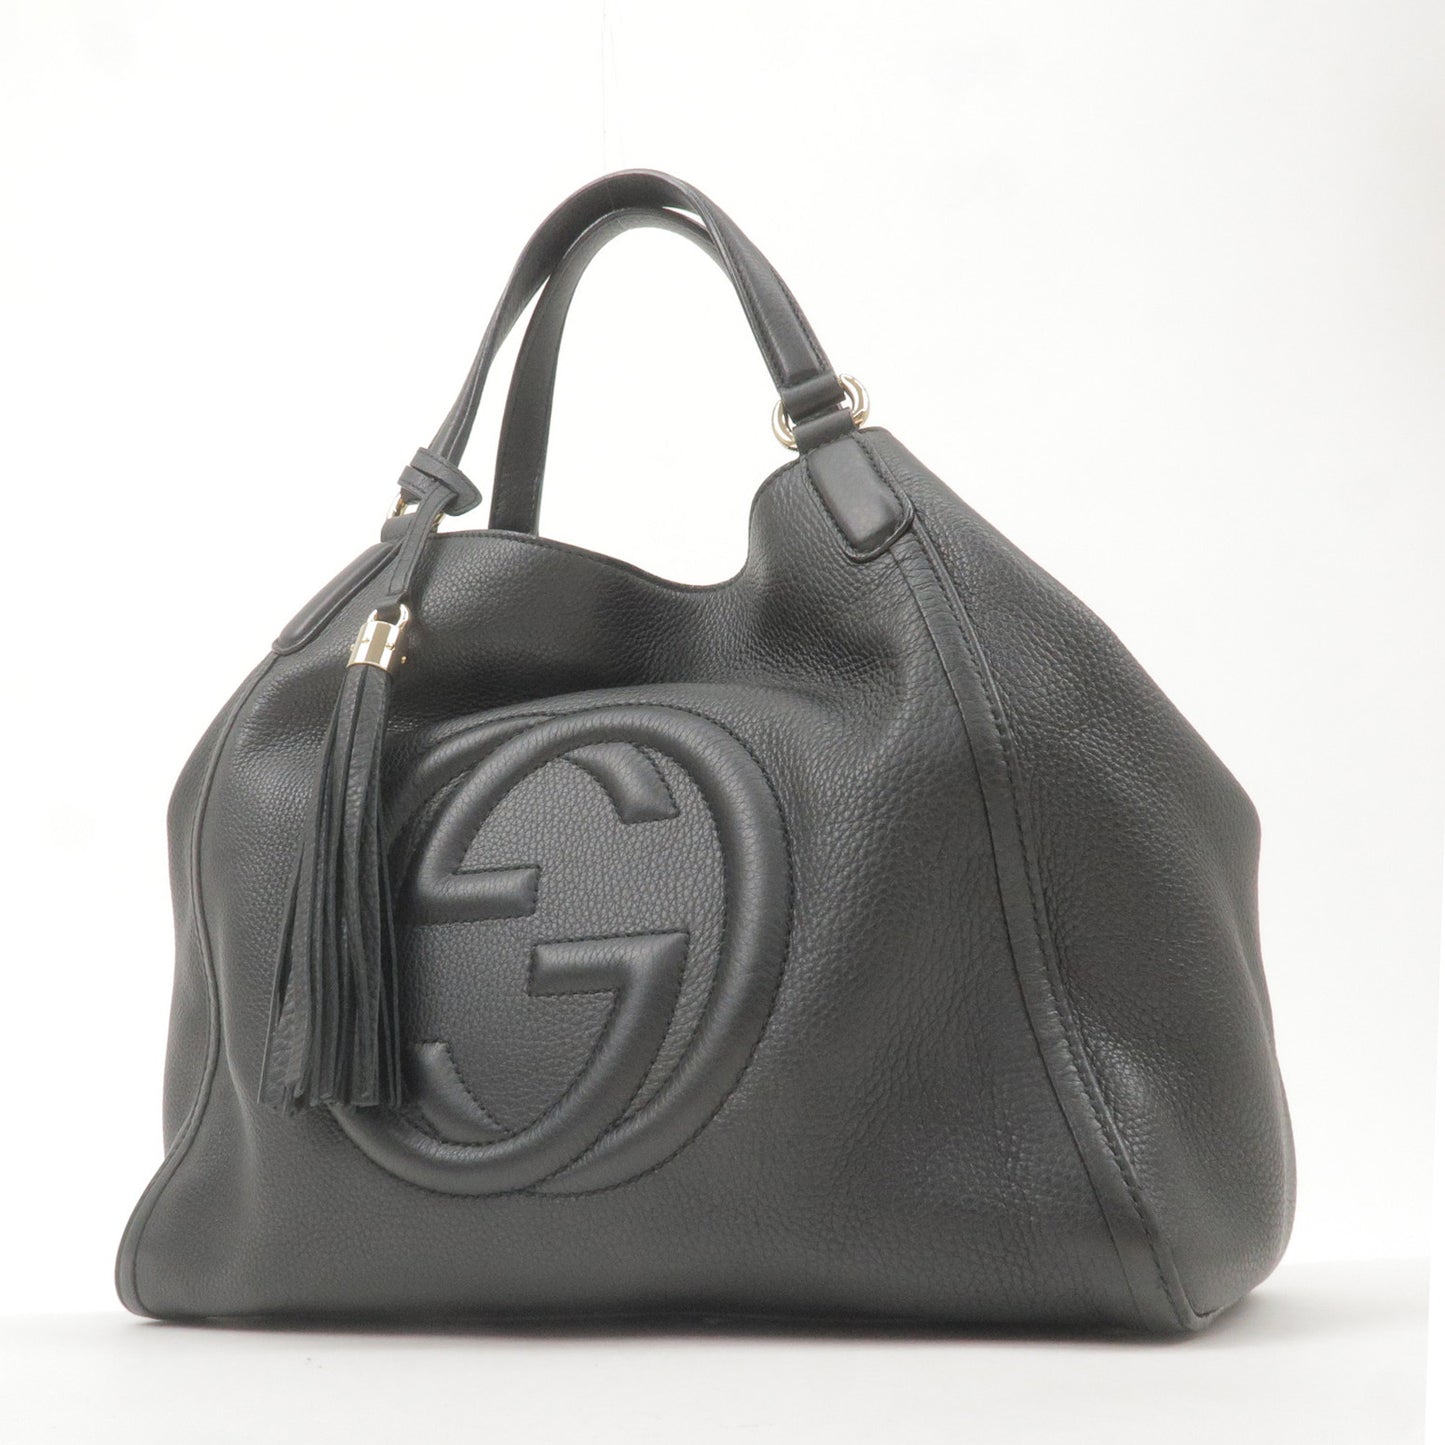 % Authentic Gucci Soho Boston Black Leather Bag for Sale in